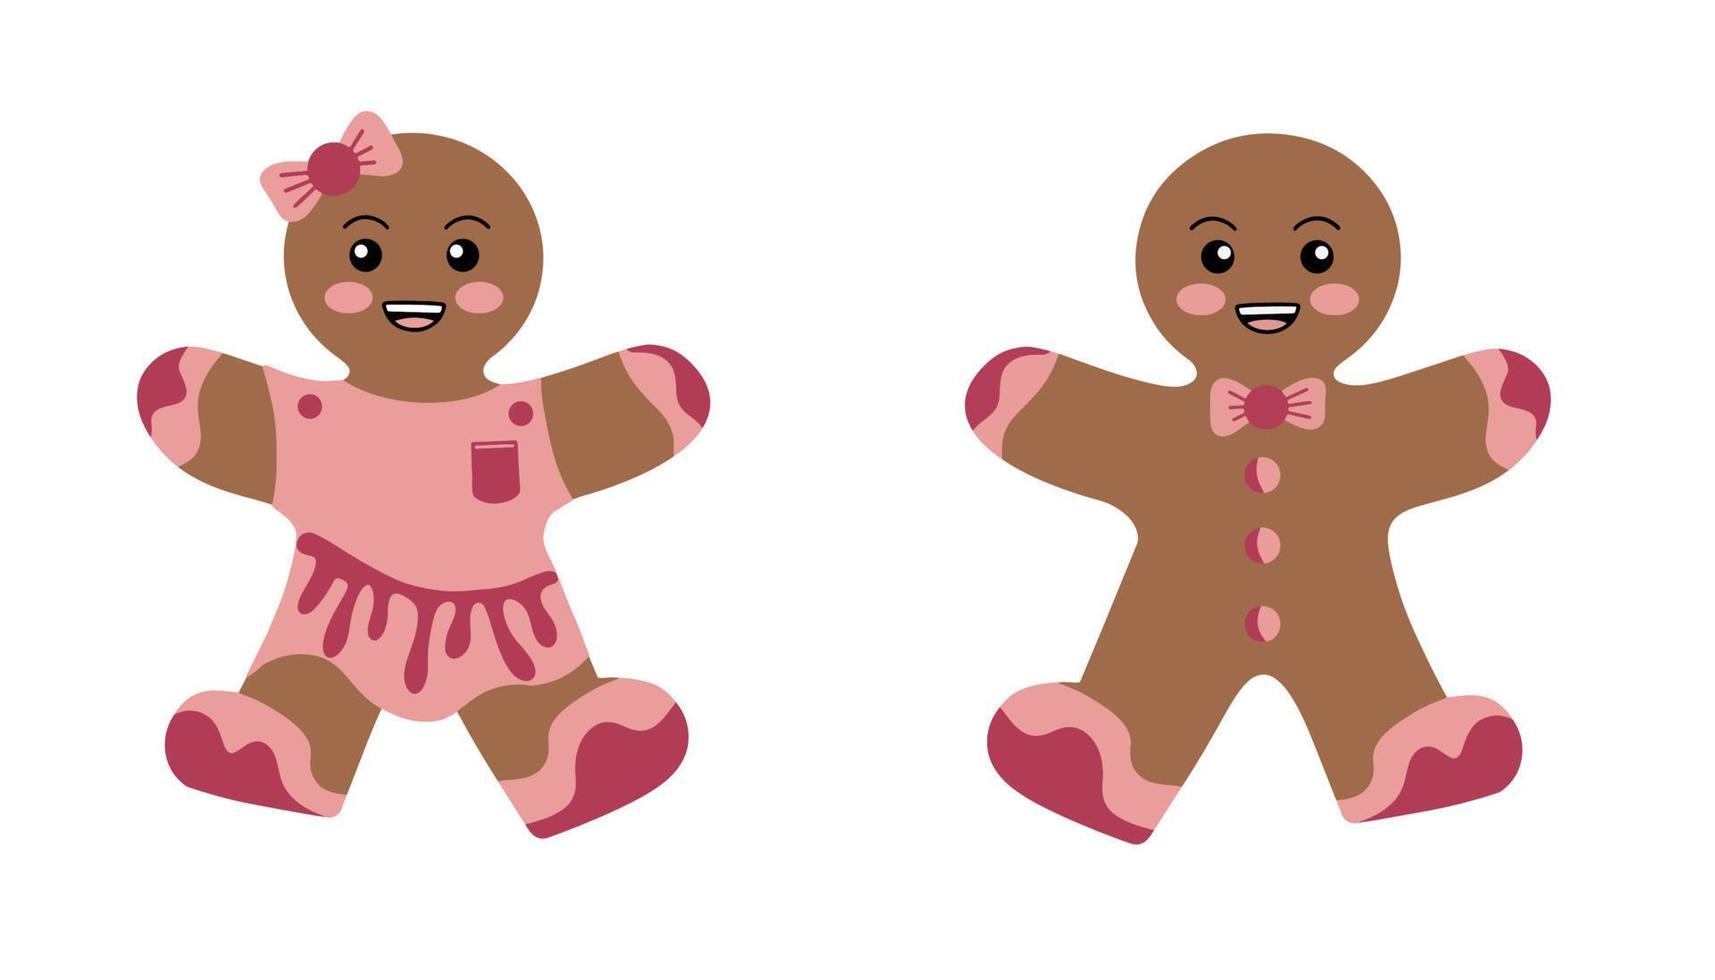 Festive cookies with a gingerbread man. Biscuits in the shape of a man with colored icing. Happy Christmas decoration. Happy Christmas. Celebration of New Year and Christmas. vector